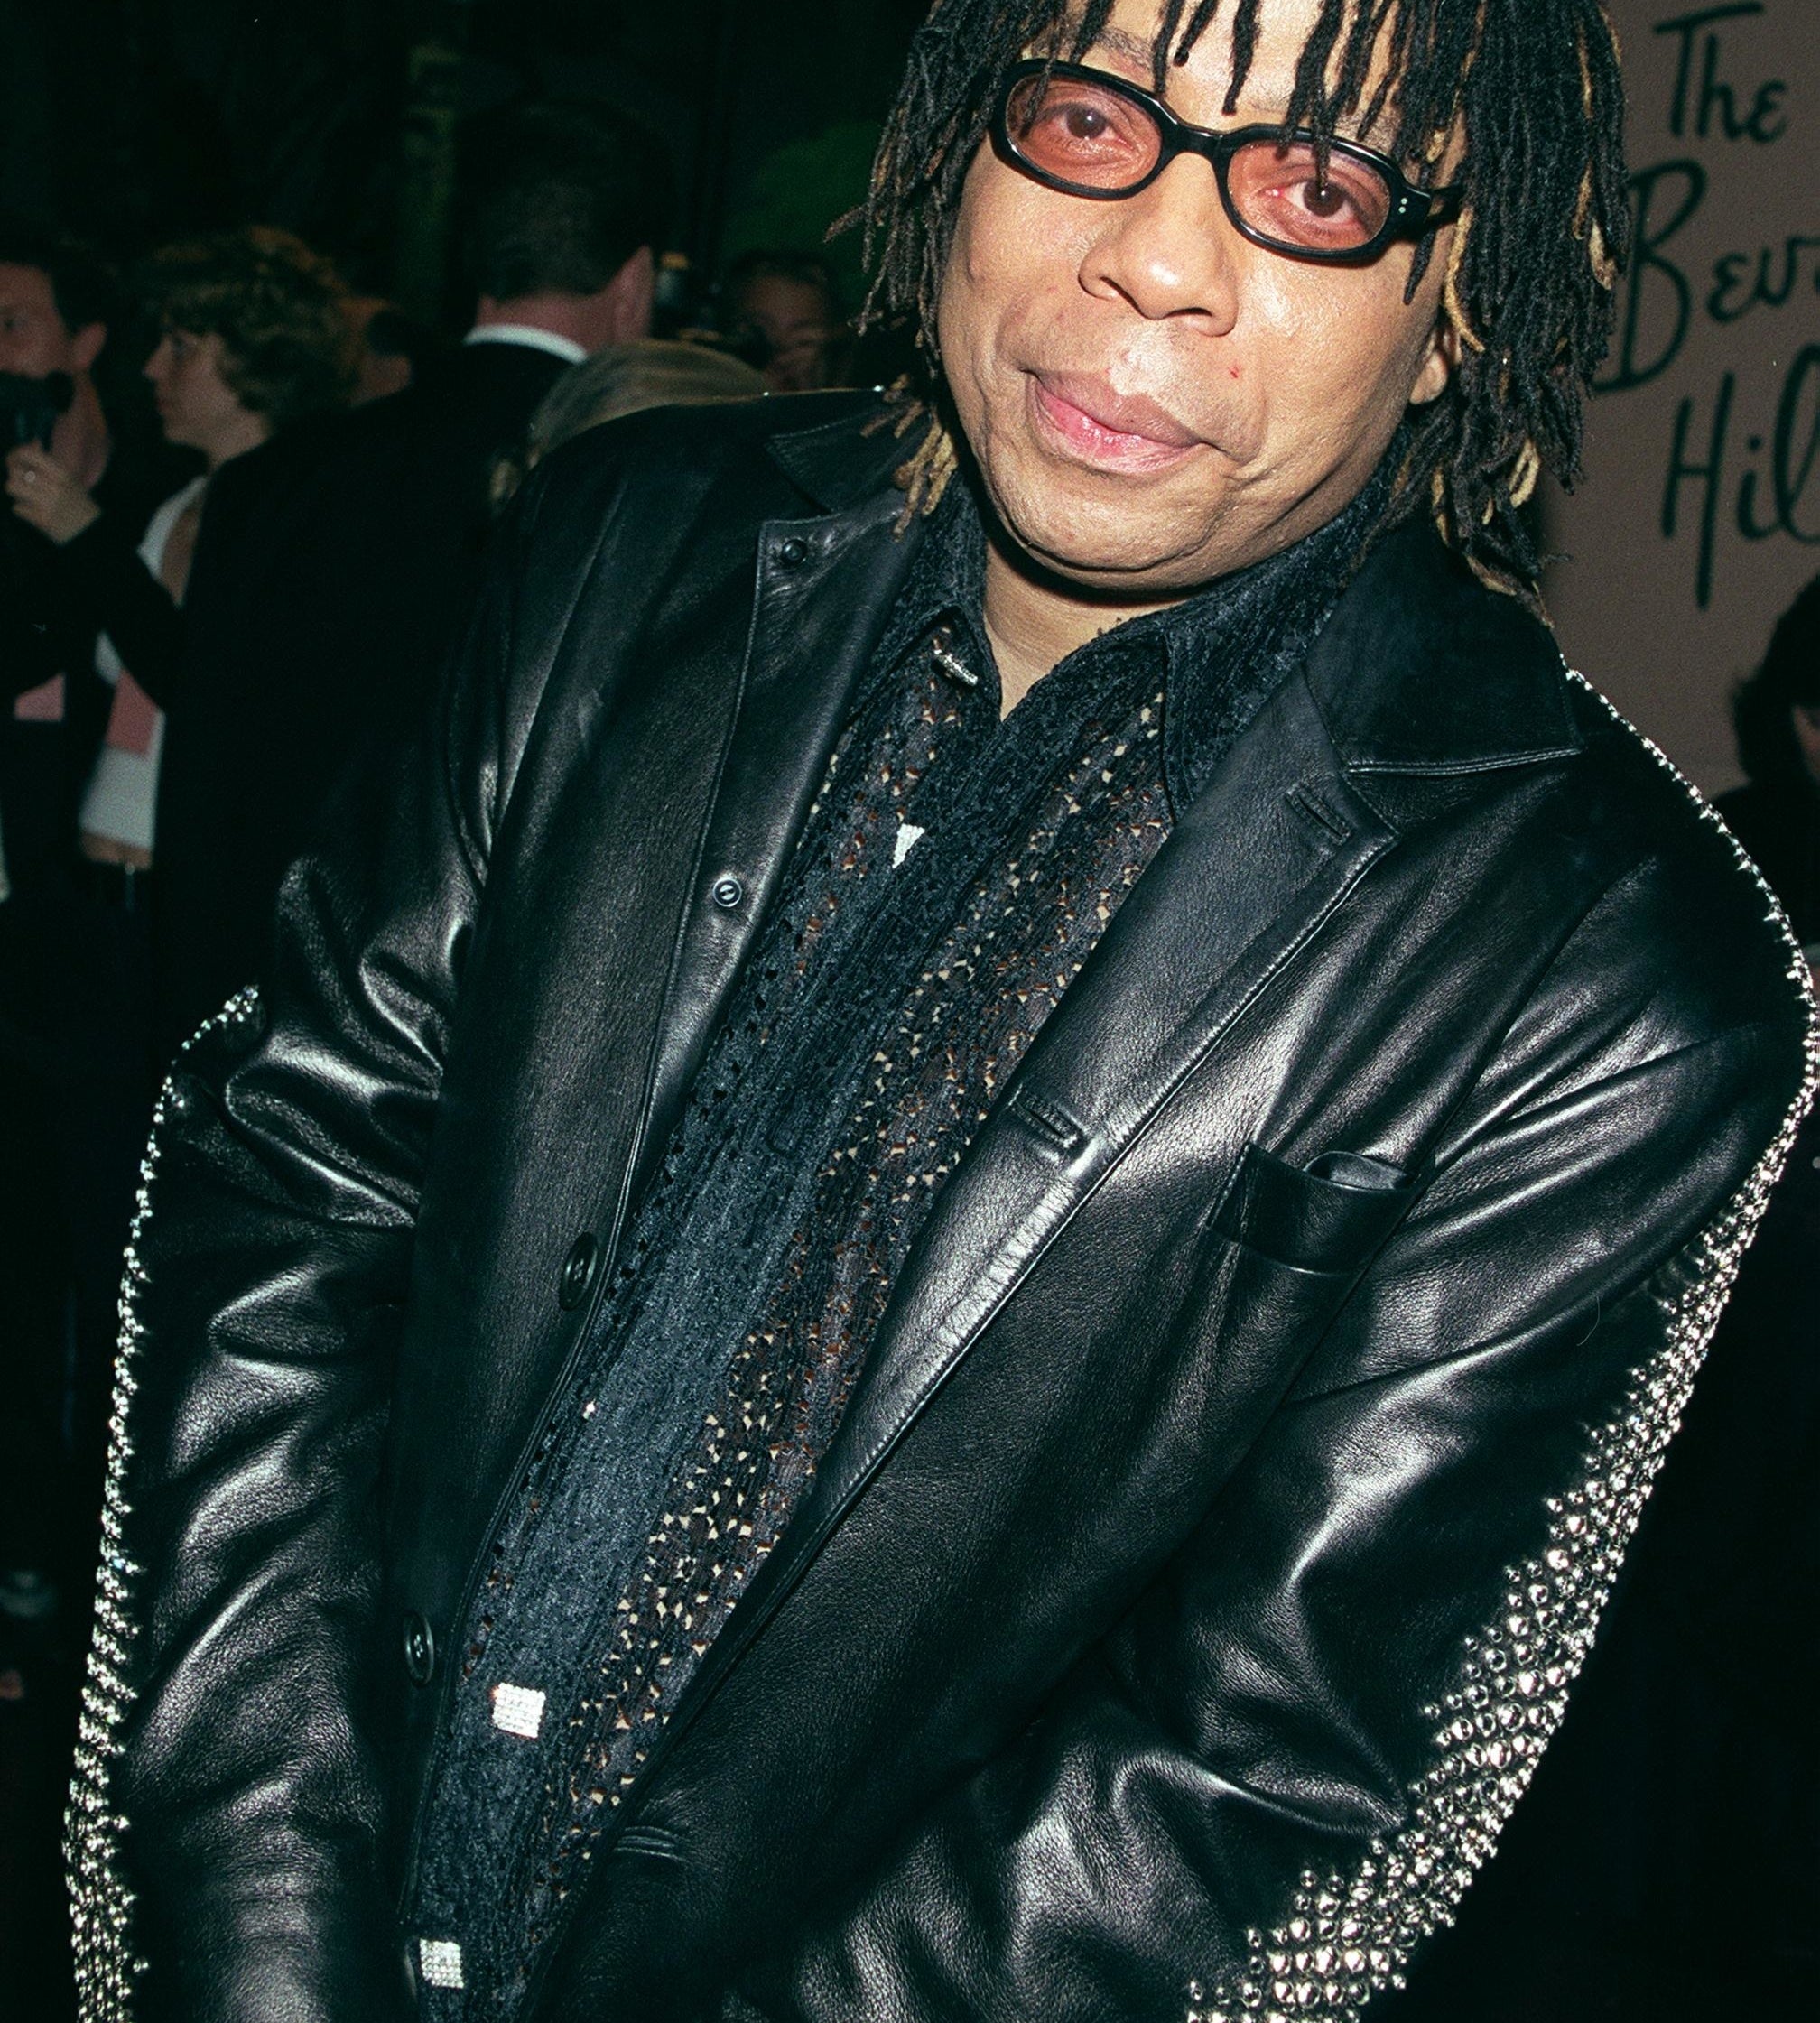 Musician Rick James attends the 10th Annual &quot;Night of 100 Stars Gala&quot; Oscar party March 25, 2001